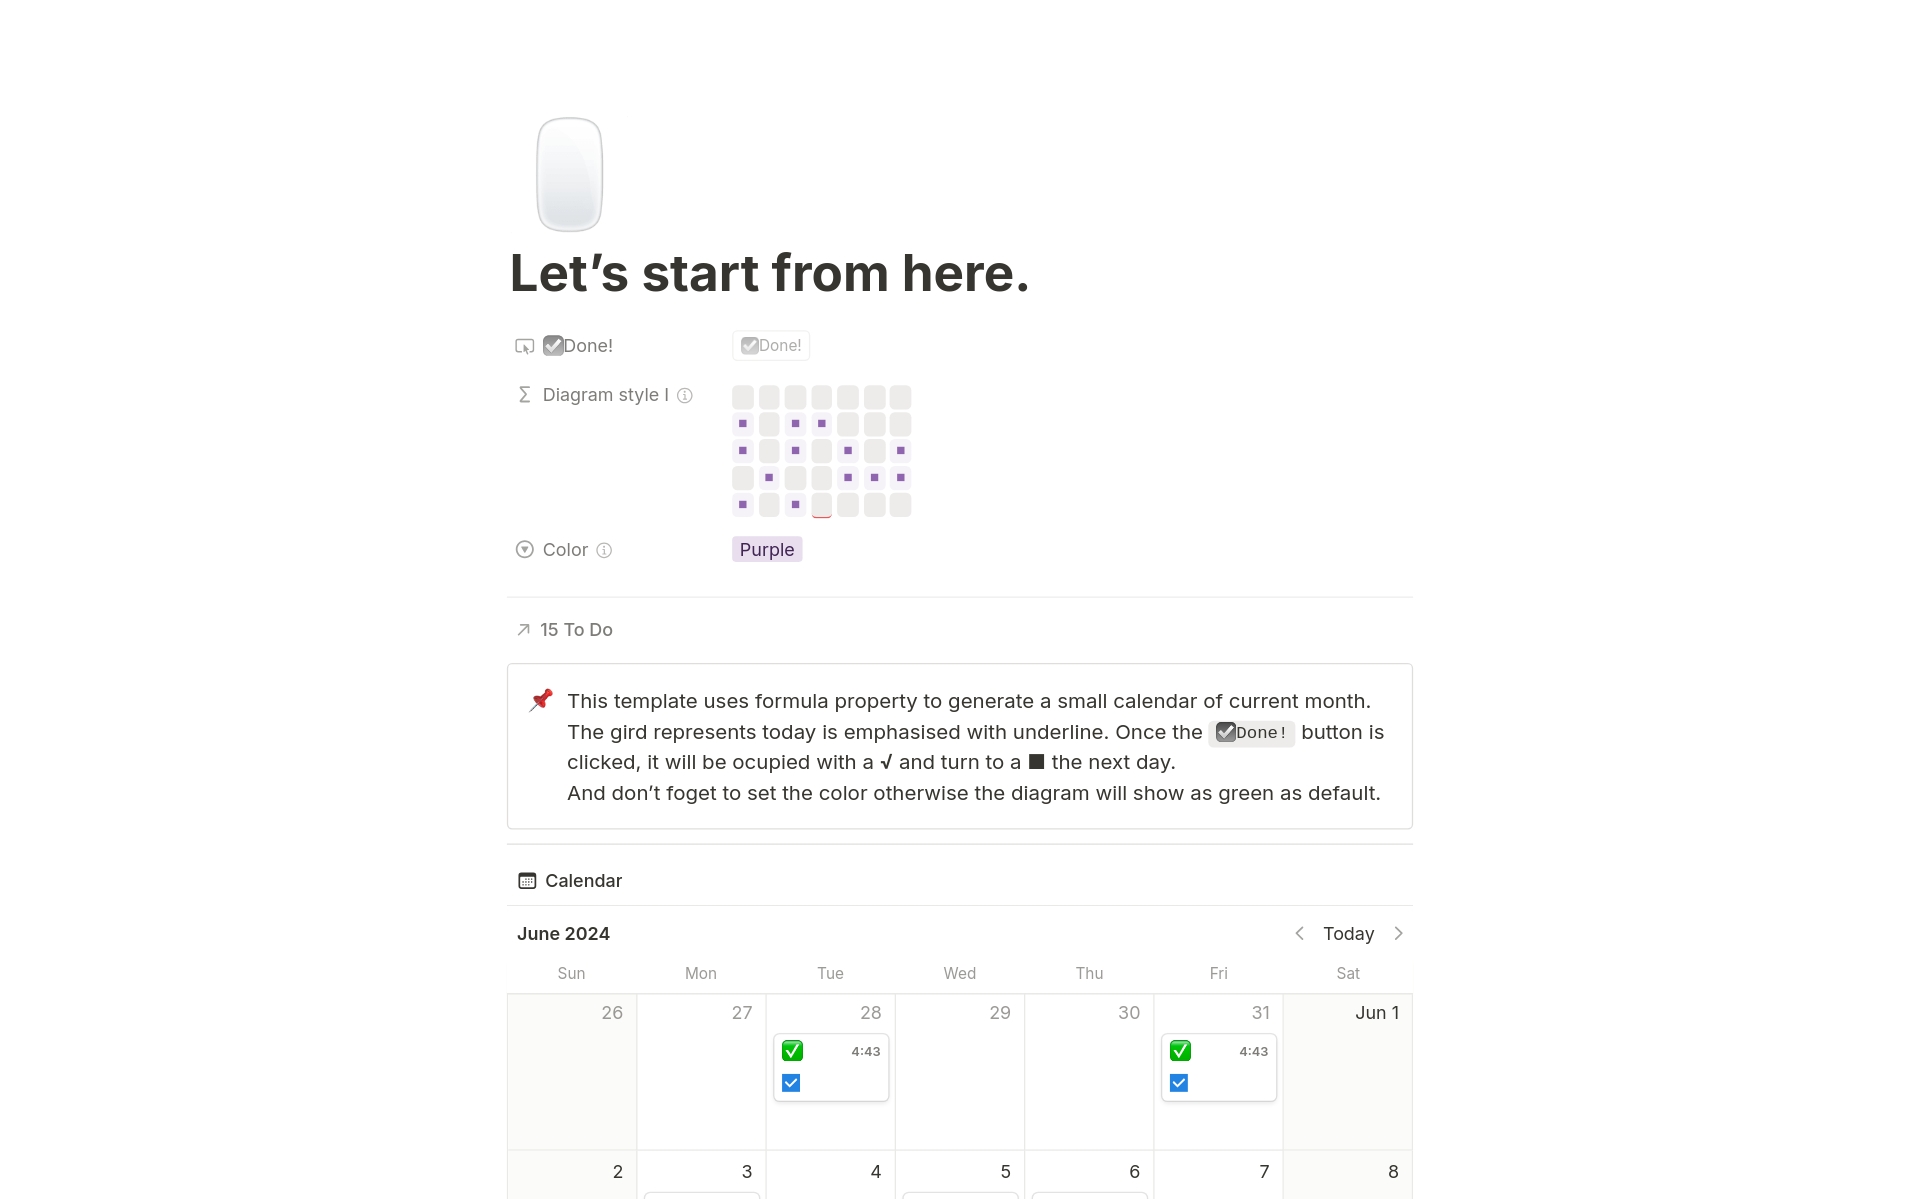 A habit tracker with real-time diagram powered with Notion’s newest features - Formula 2.0 and Button in database.